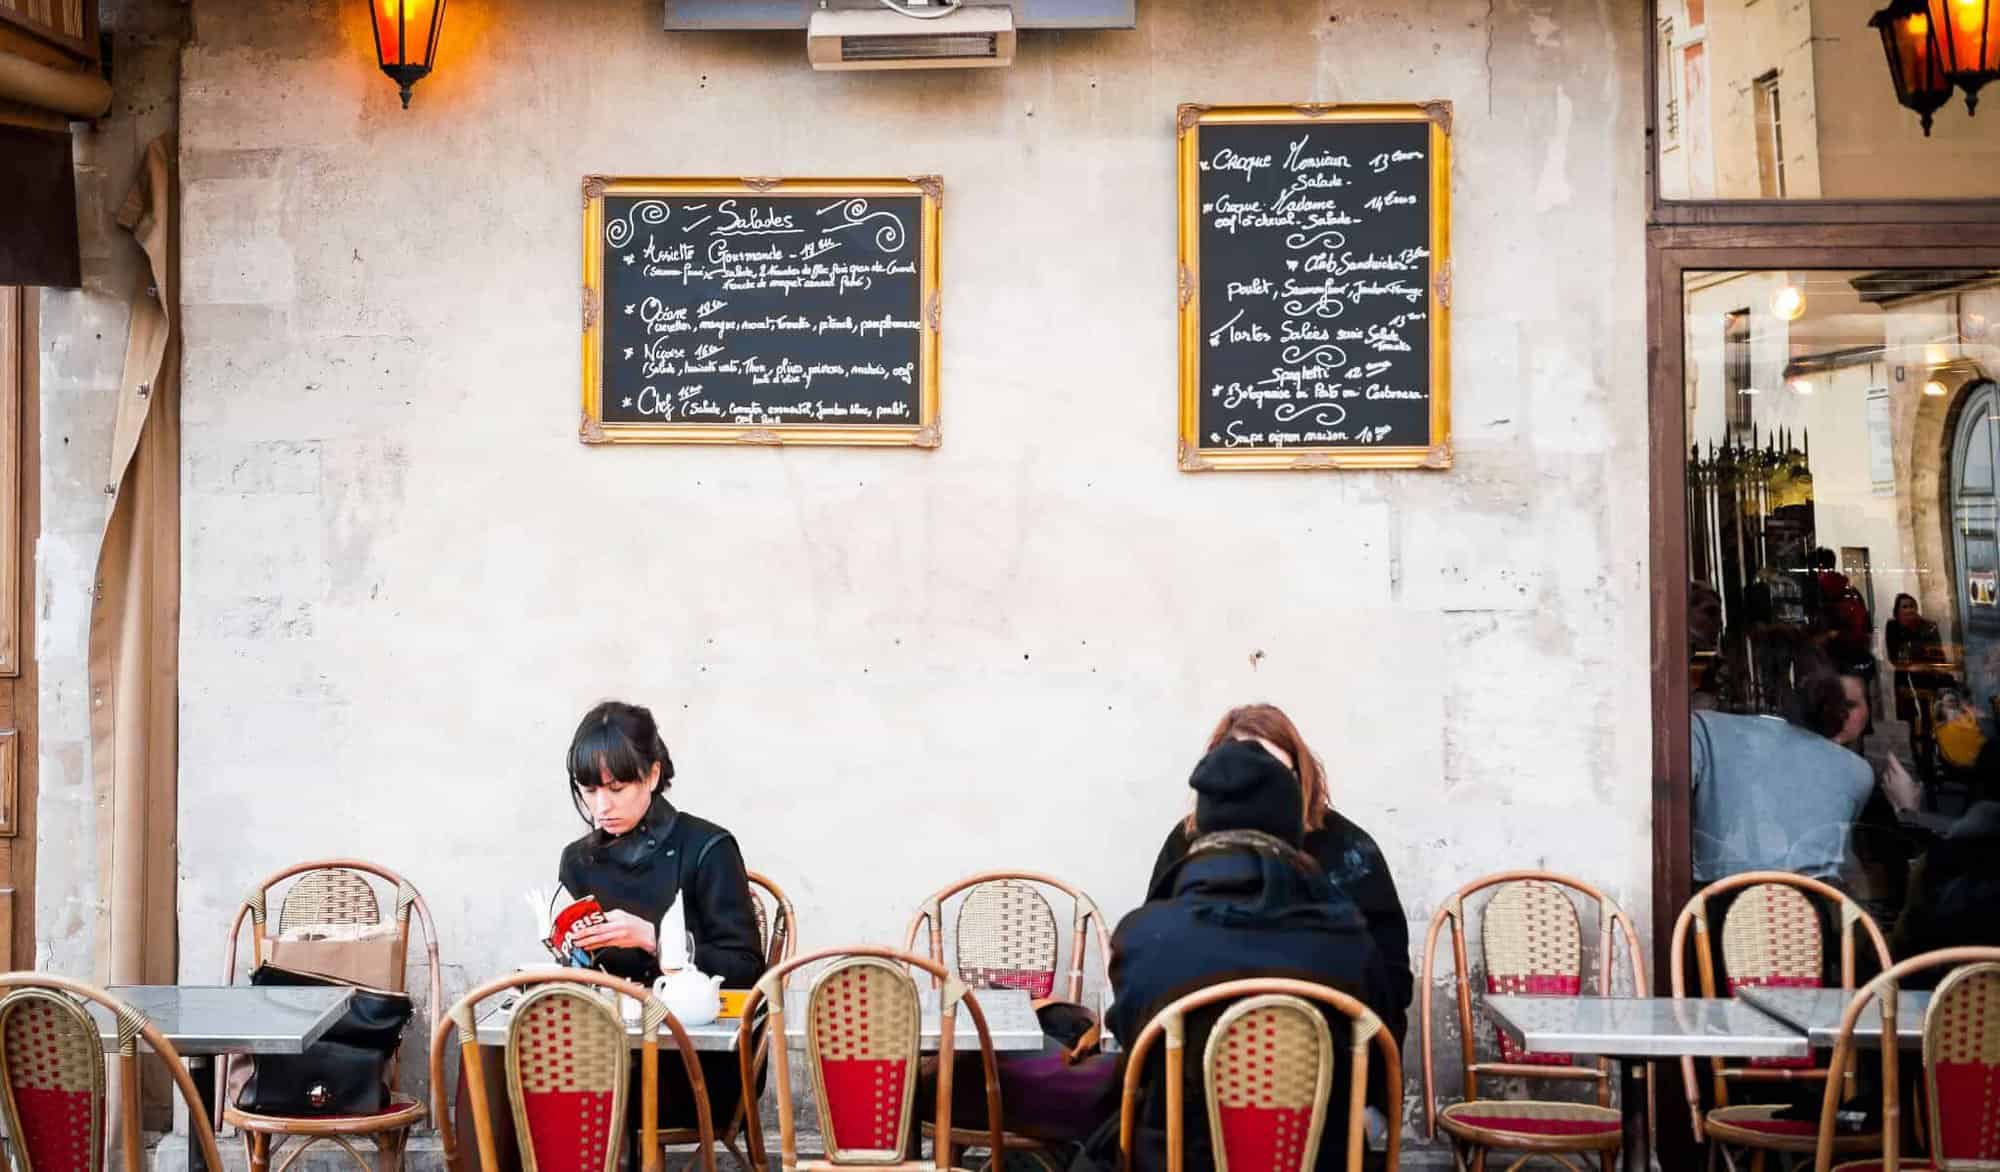 A terrace of a Parisian restaurant with 3 people sitting in red and brown rattan chairs, with menus on slate boards posted on the stone wall.